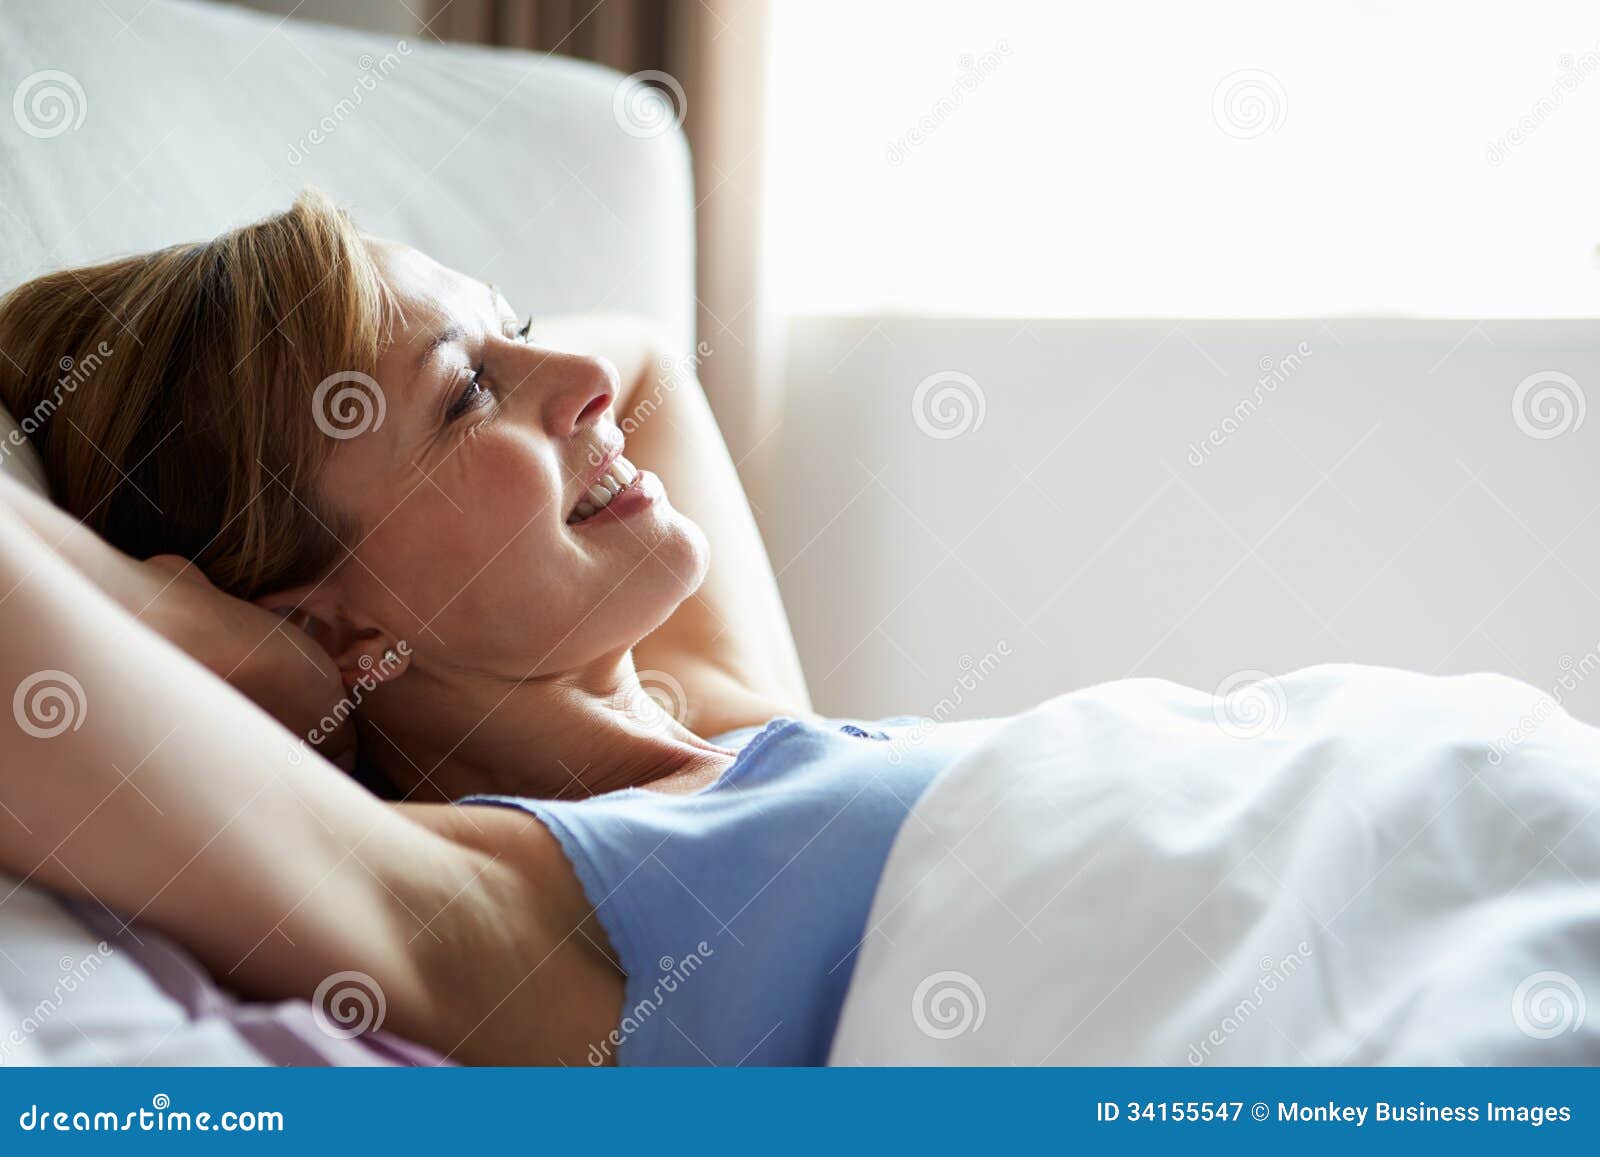 attractive middle aged woman waking up in bed